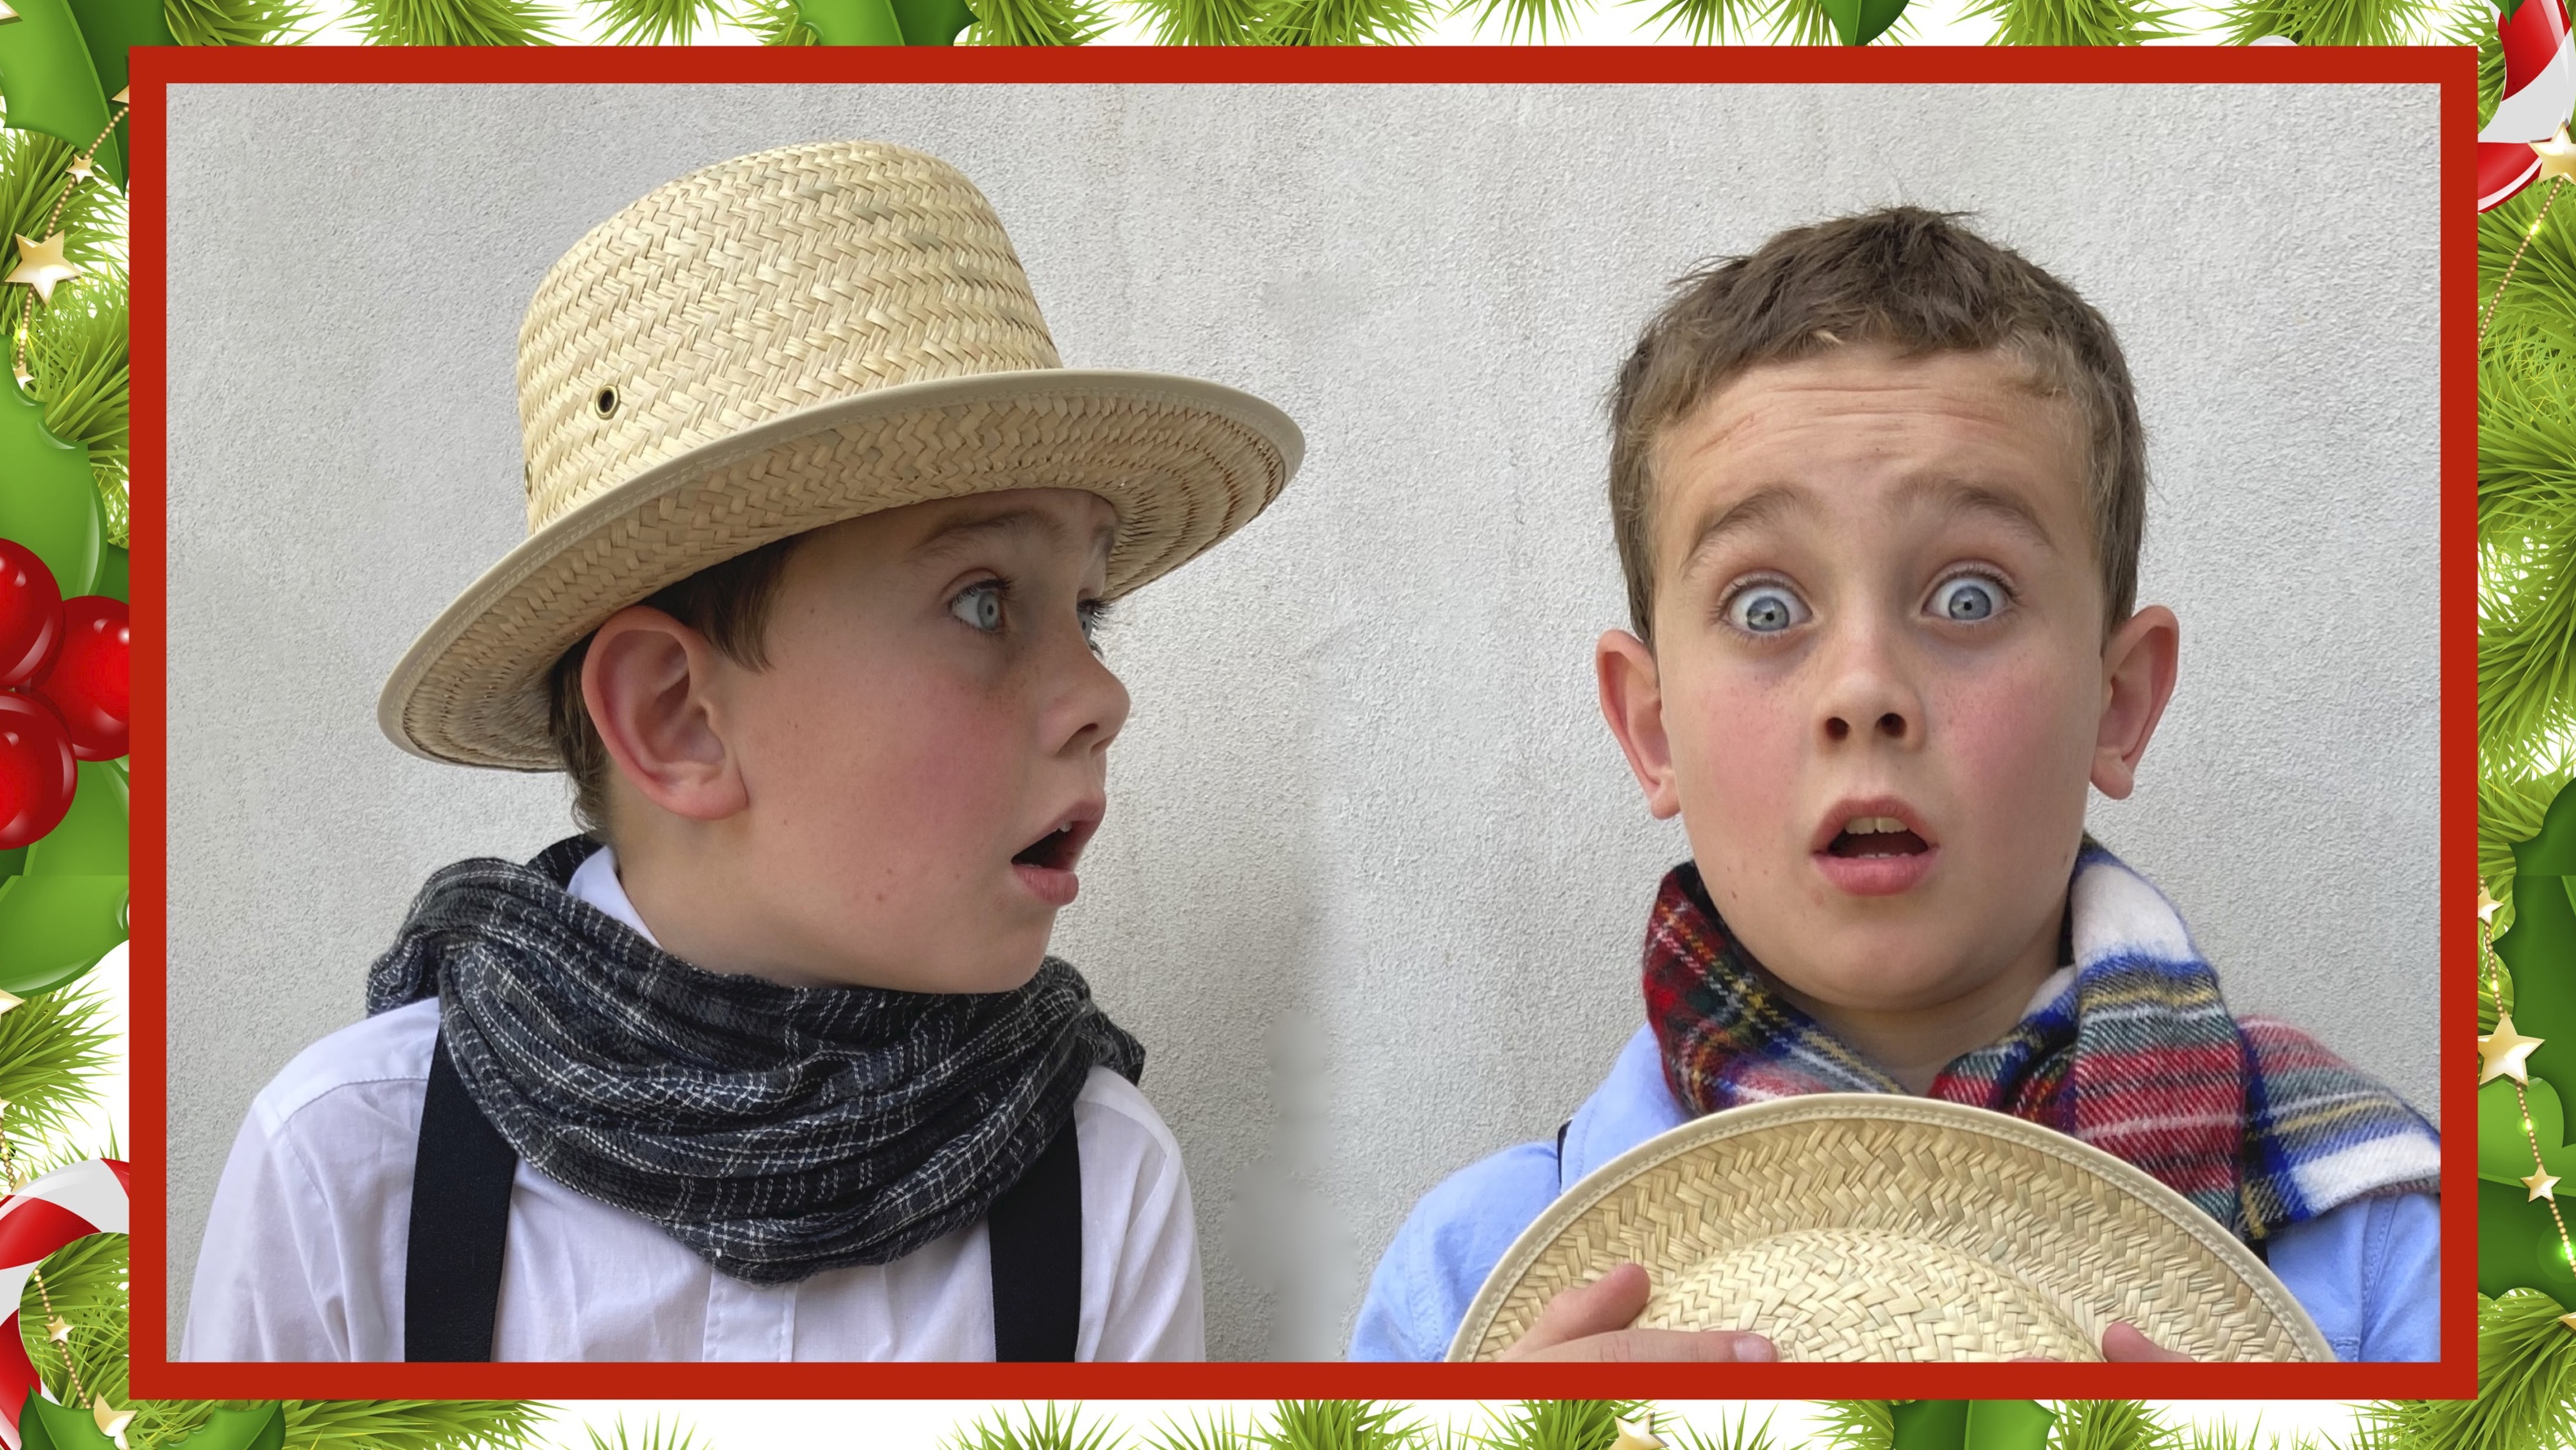 Alfie and Benji are in trouble again!